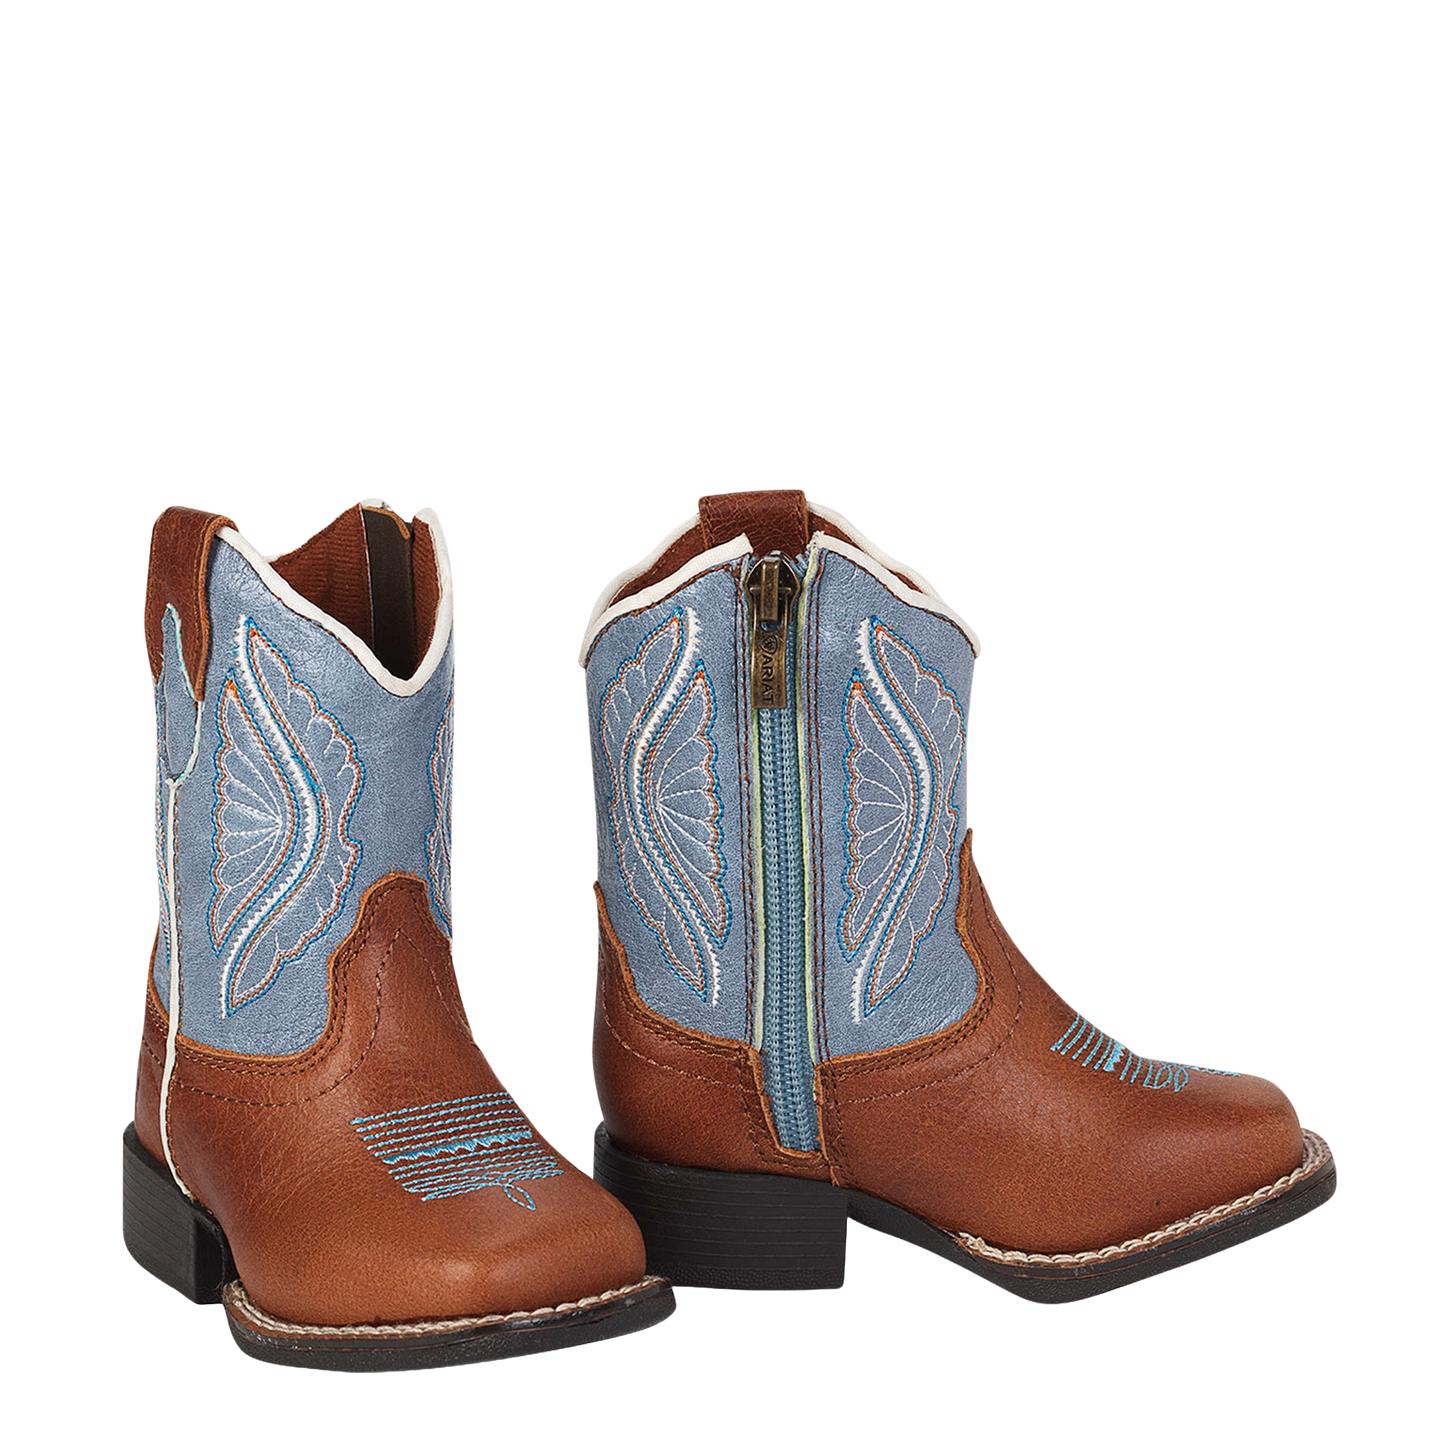 Ariat Toddler Lil Stomper Shelby Light Blue Western Boots A441002508